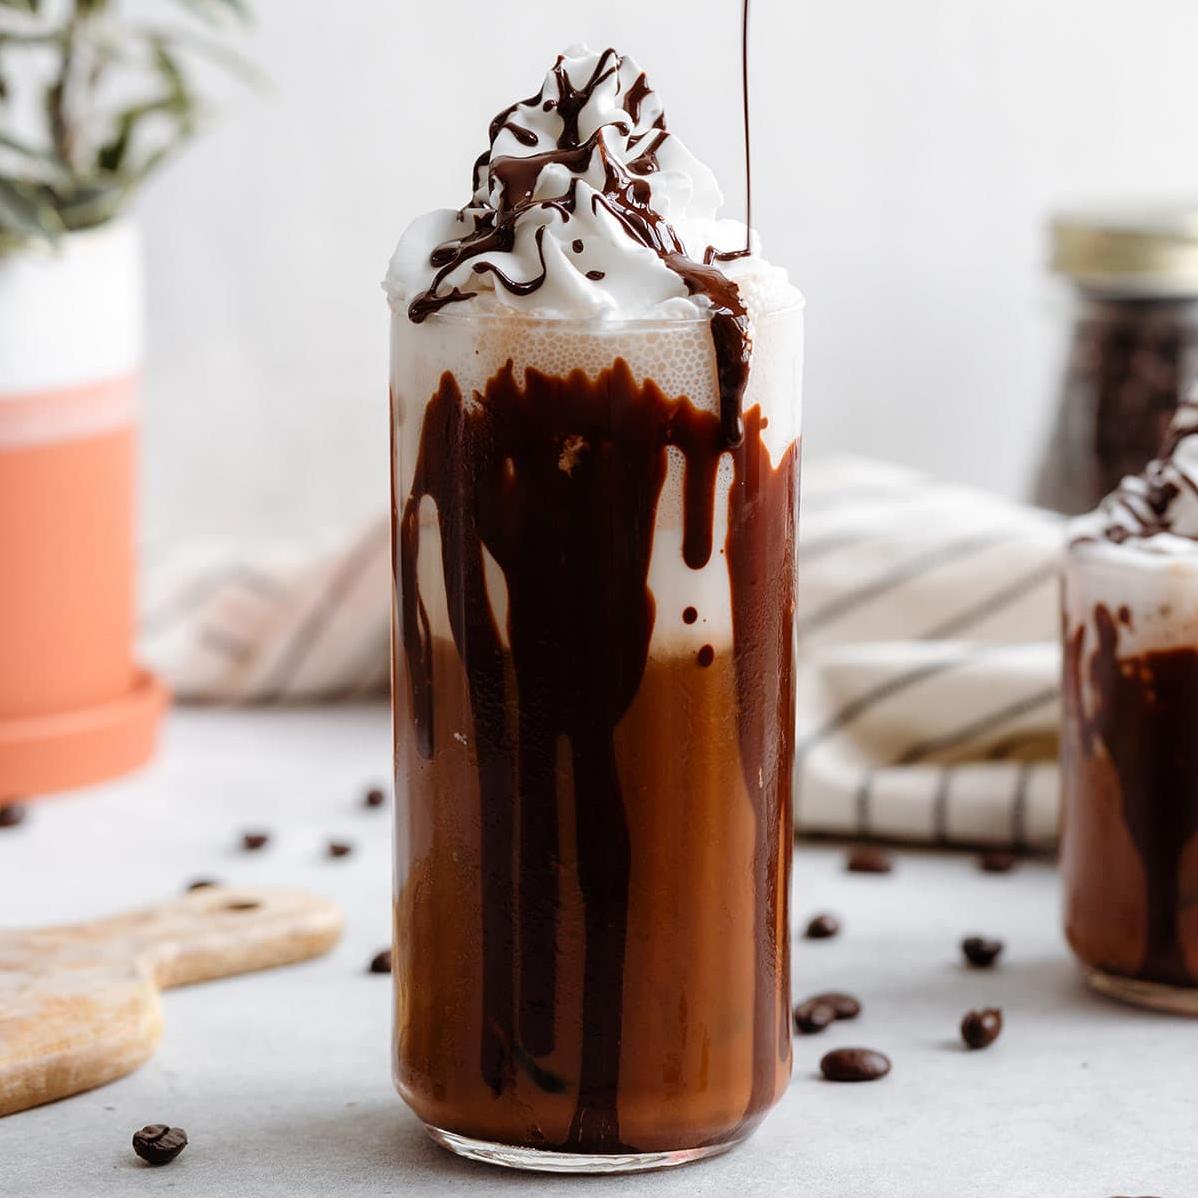  Add a touch of sweetness to your day with this iced coffee with chocolate recipe.